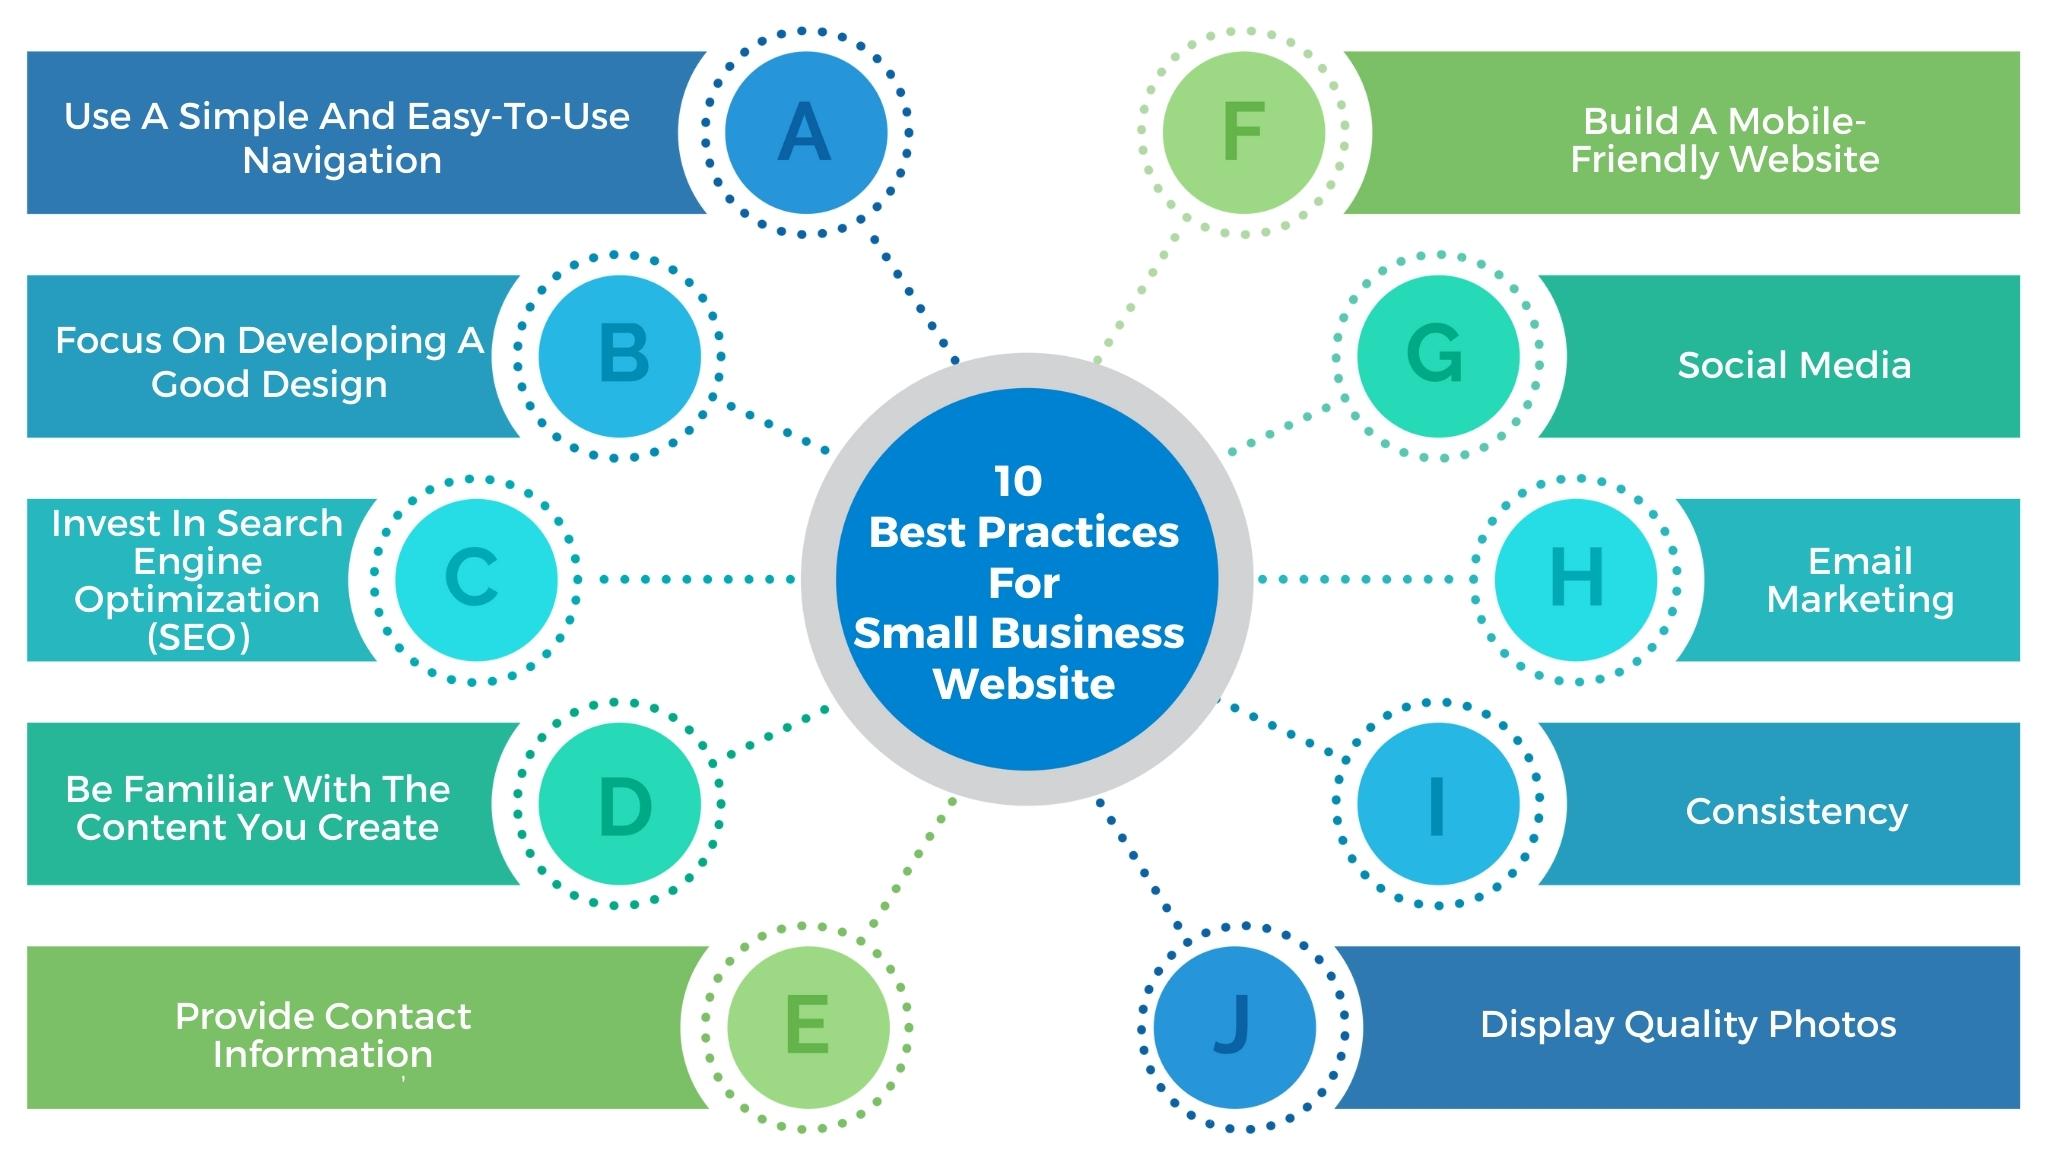 10 Best Practices for Small Business Website